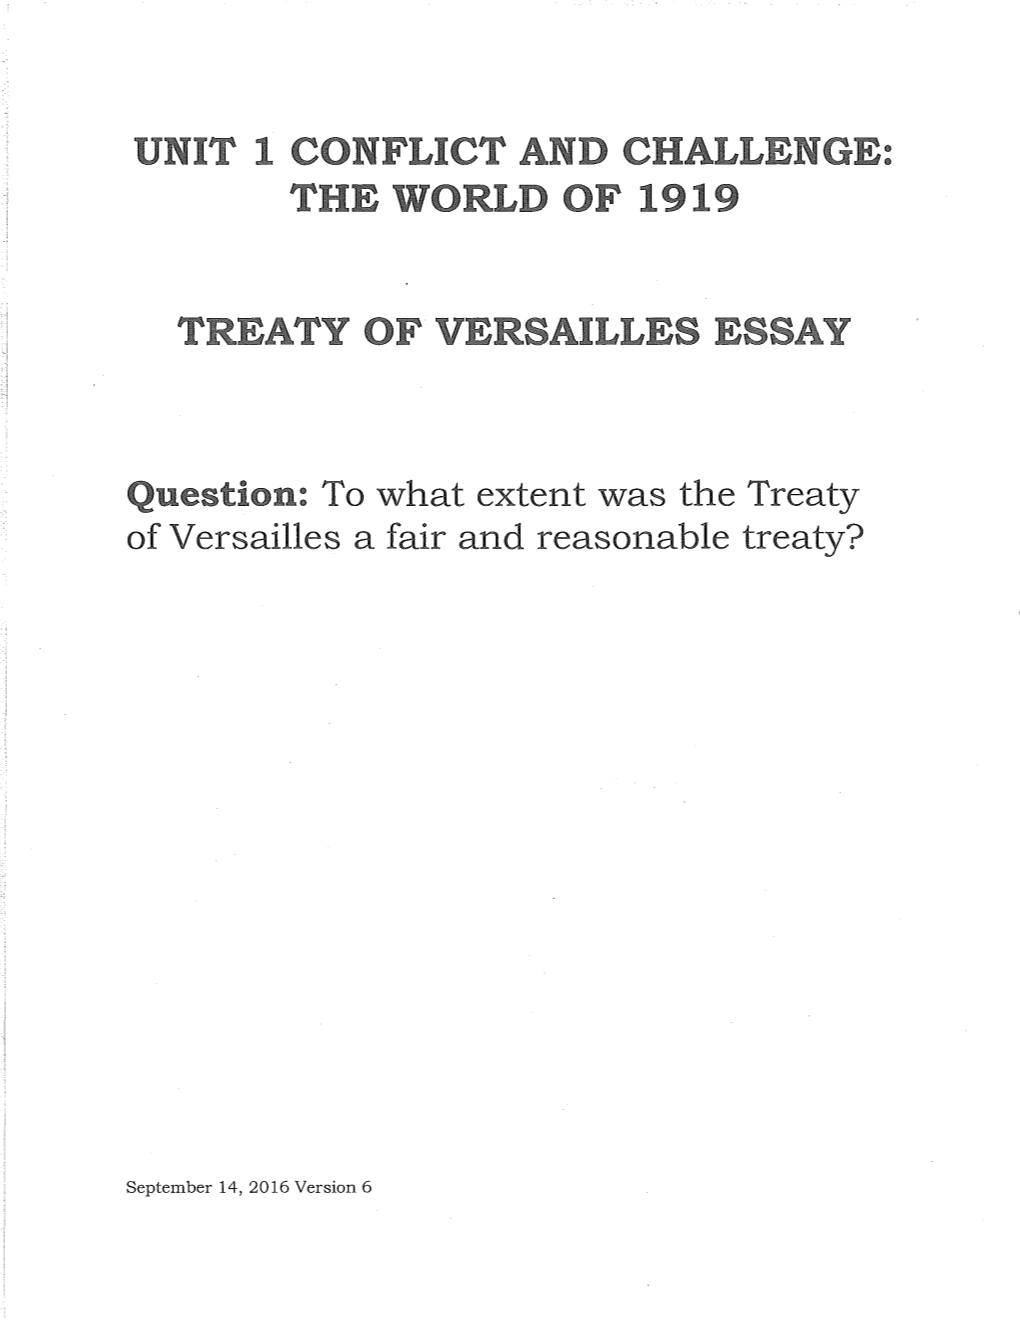 Question: to What Extent Was the Treaty of Versailles a Fair and Reasonable Treaty?